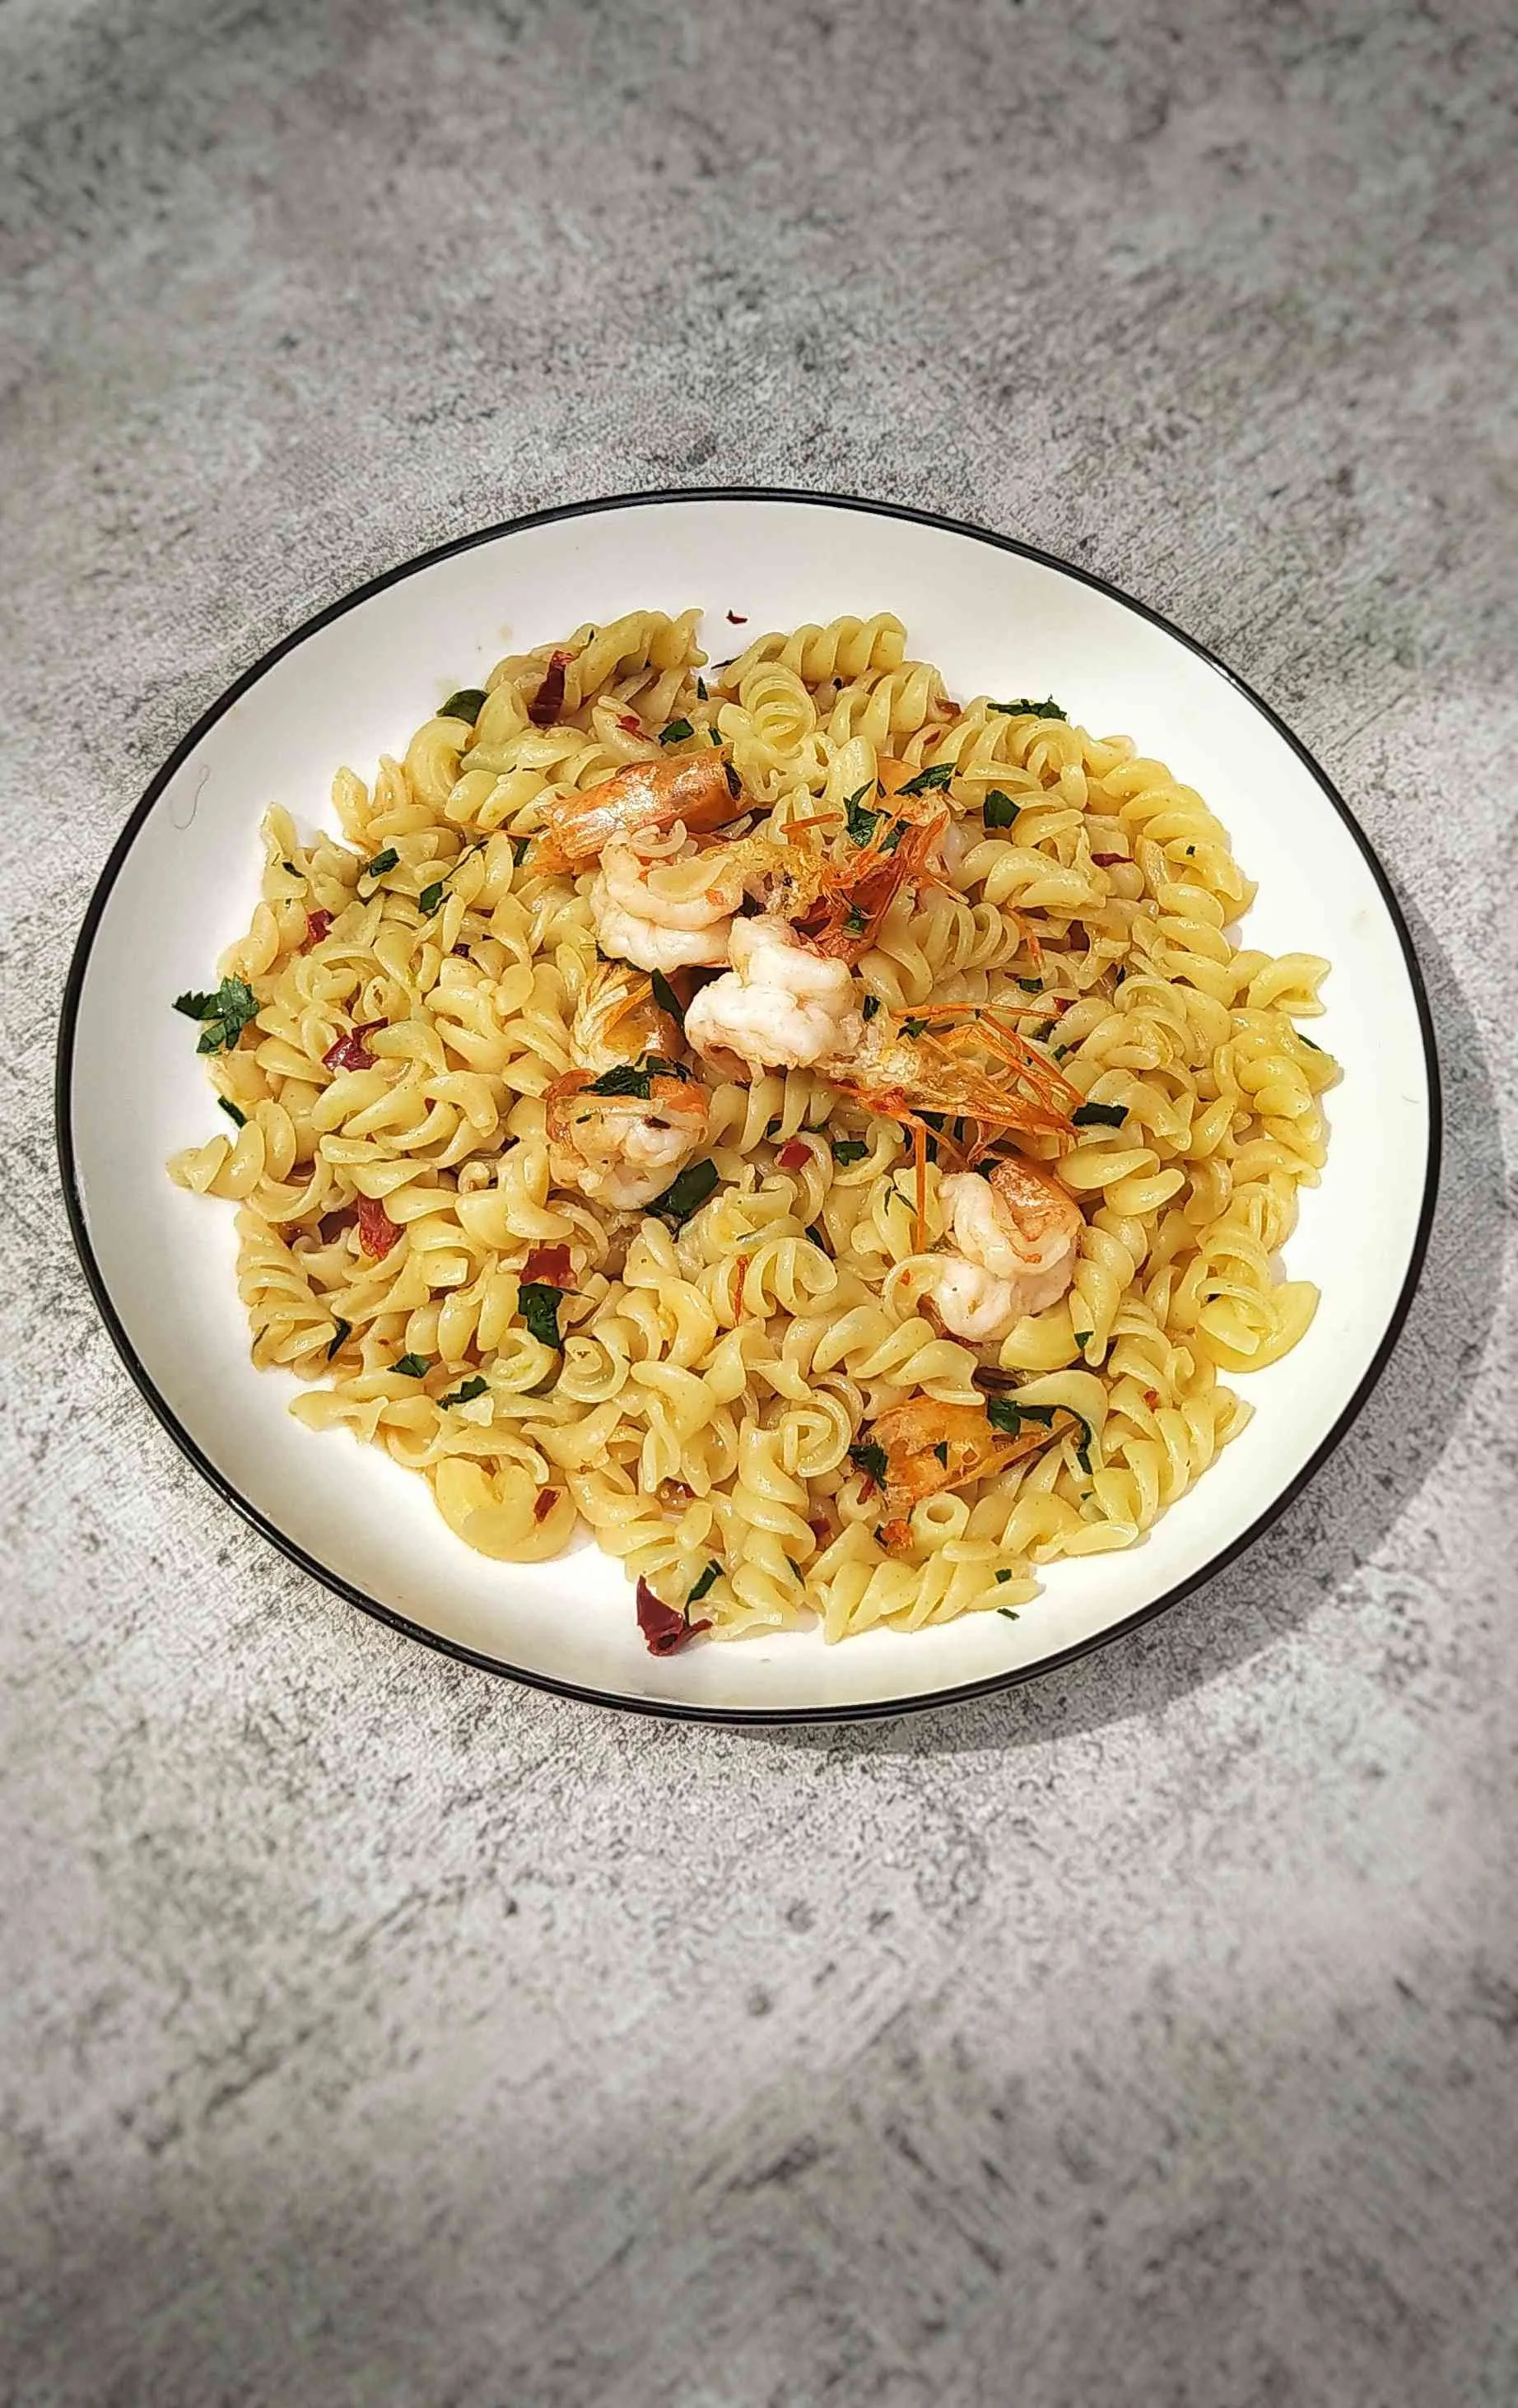 Spicy Pasta With Prawn